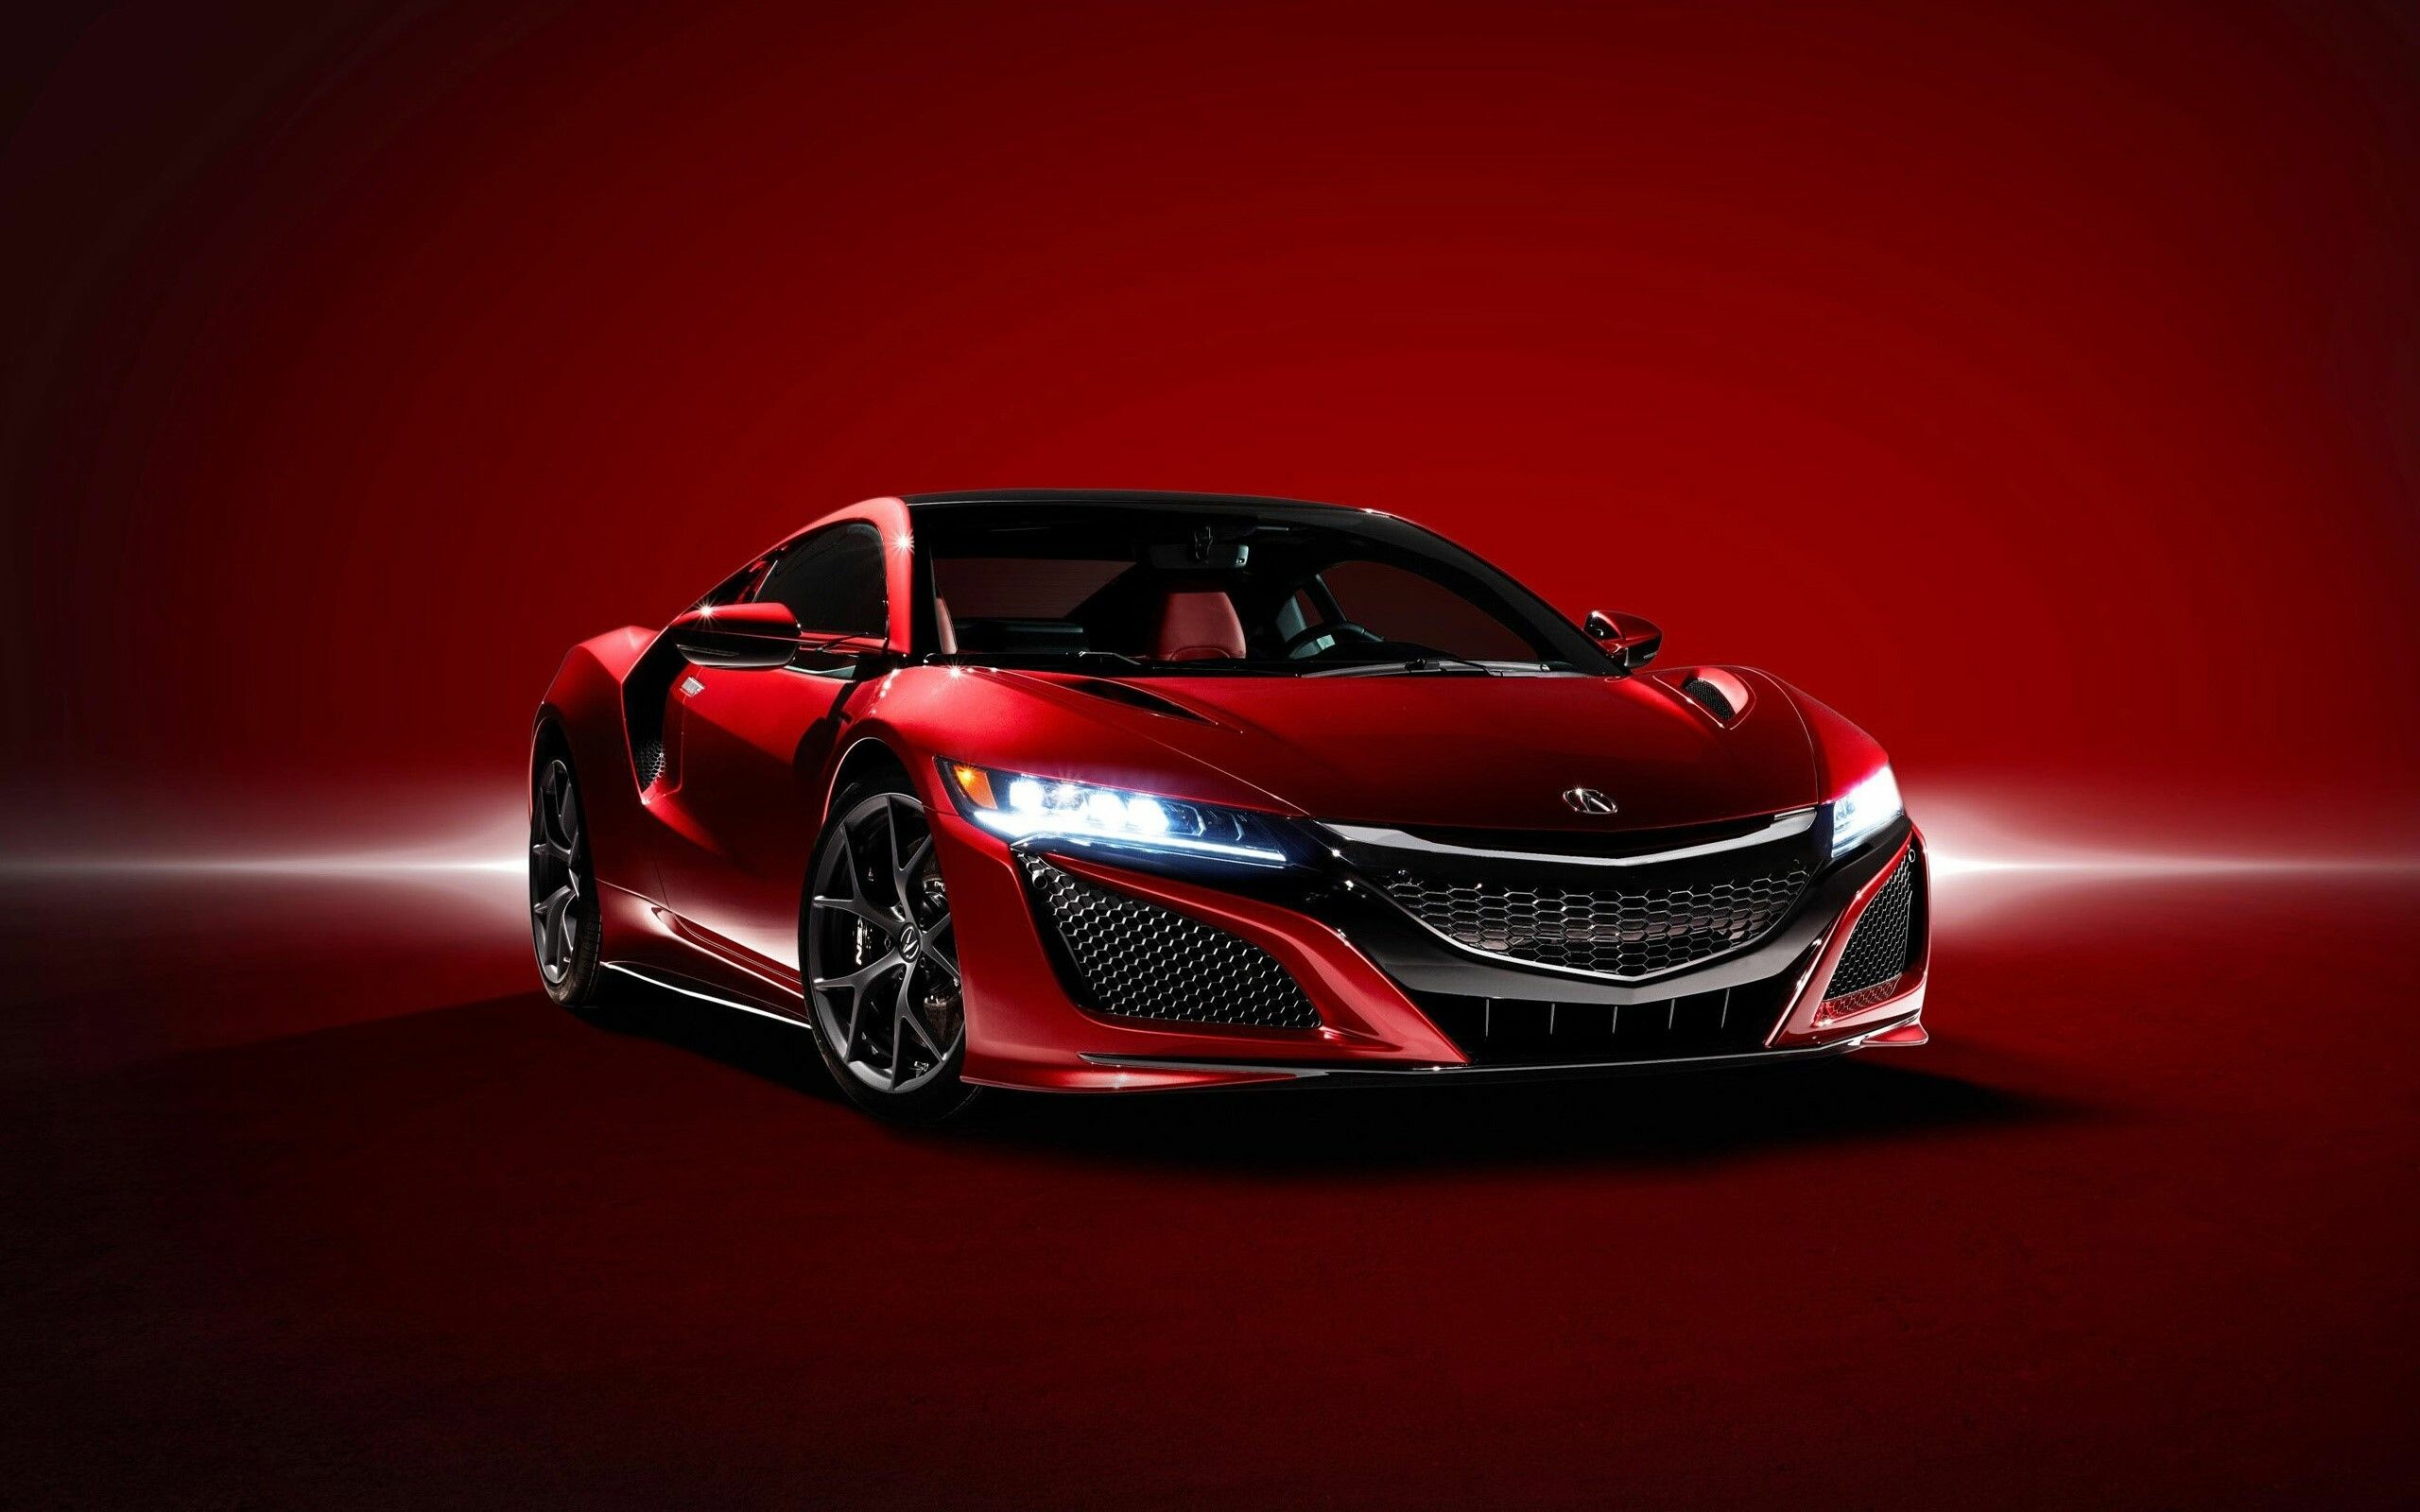 Acura: The luxury and performance division of Japanese automaker Honda. 2560x1600 HD Wallpaper.